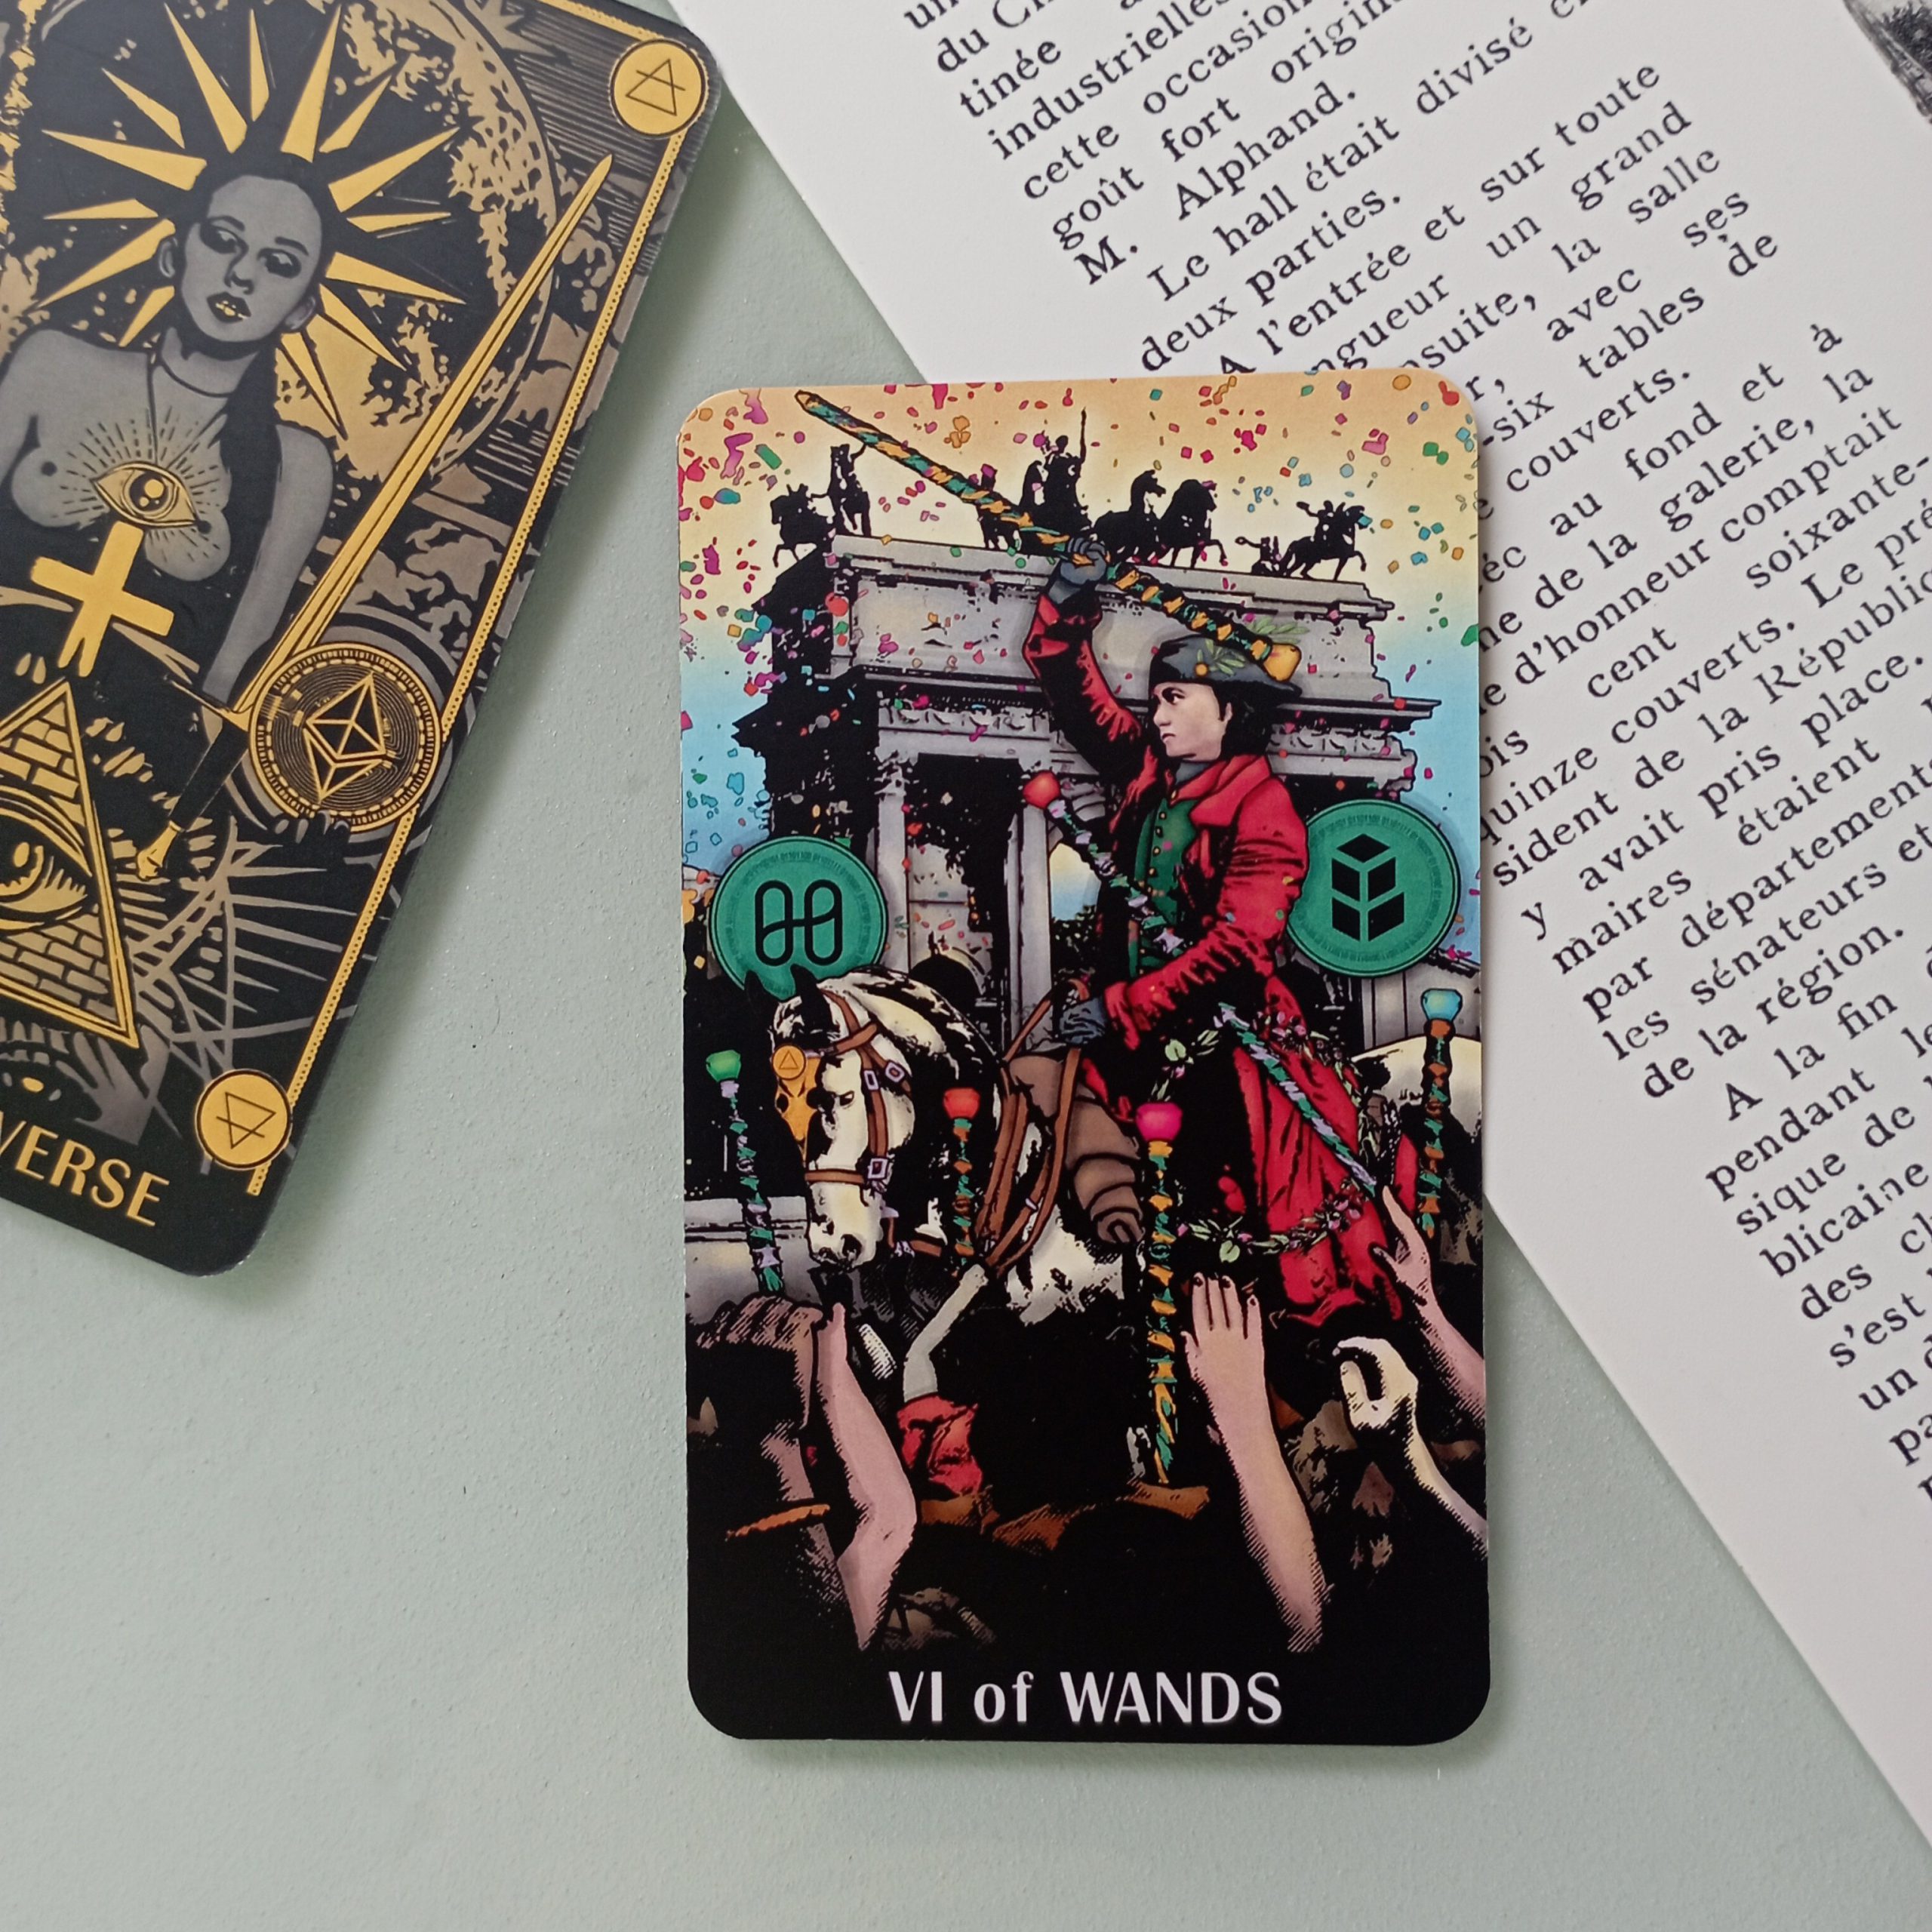 Six of Wands Meaning